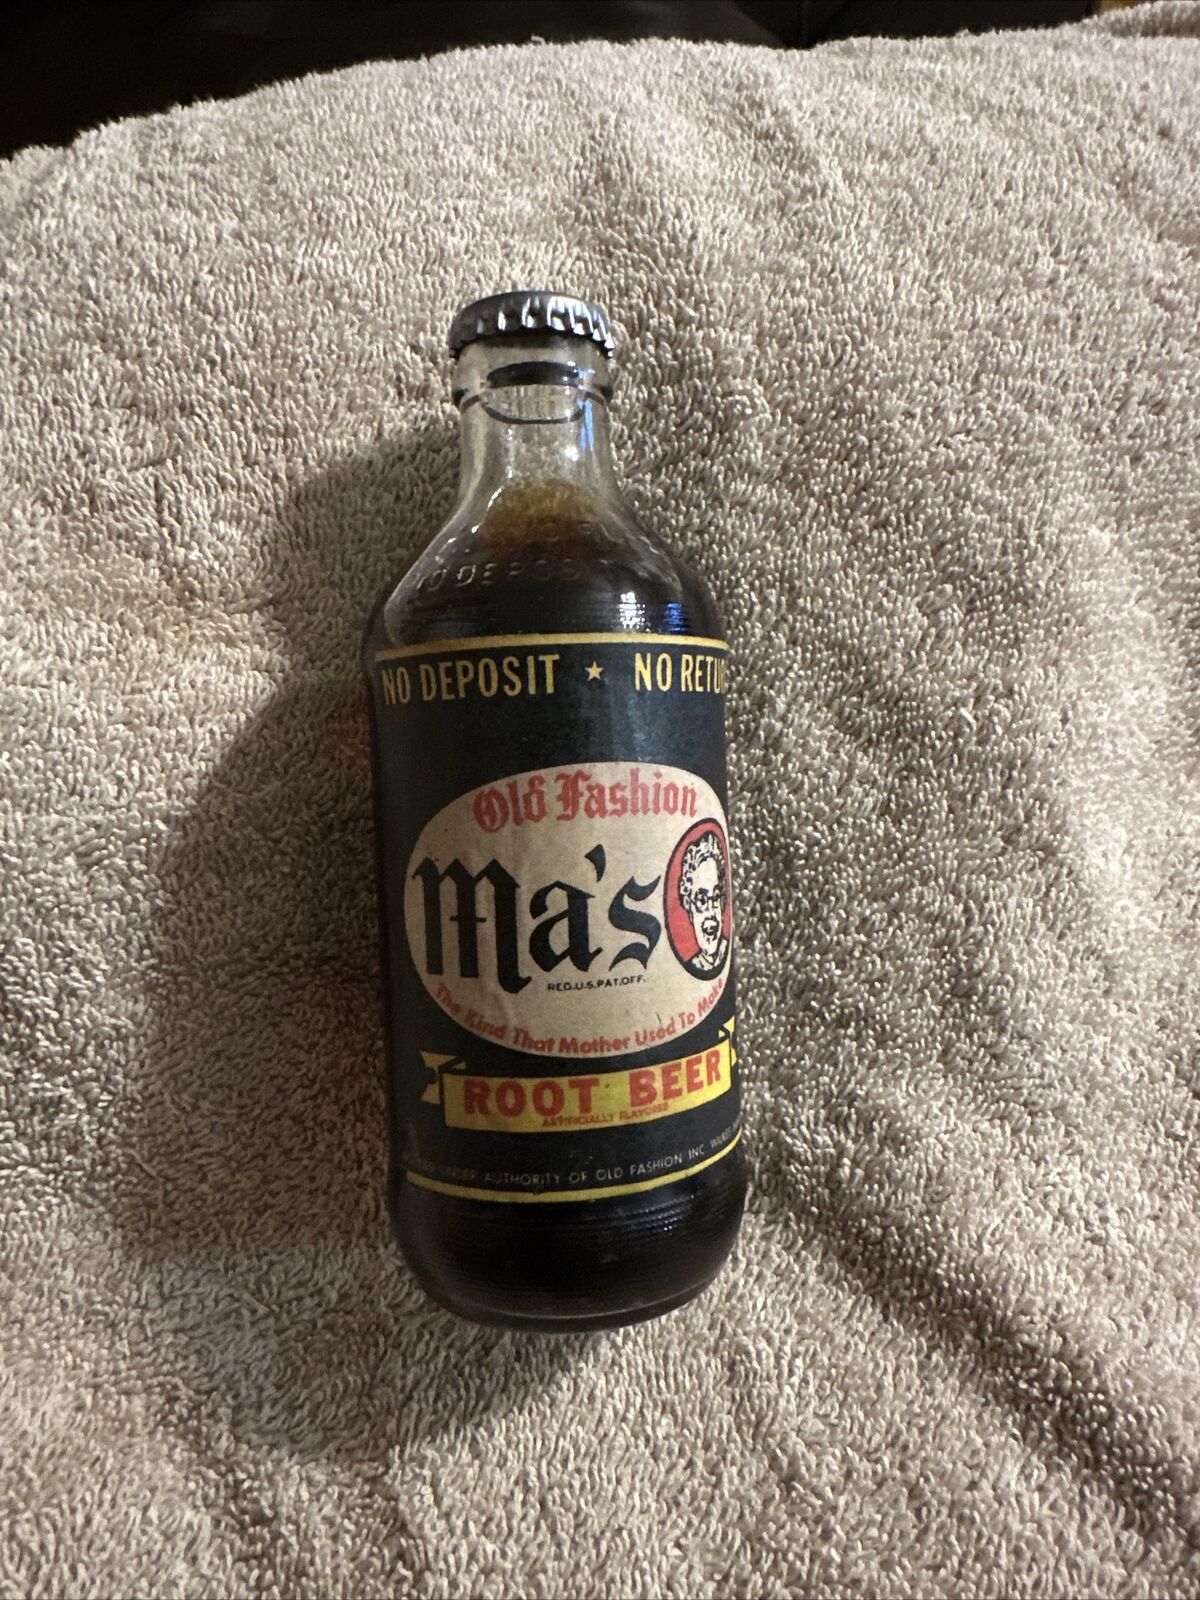 SCARCE MA’S ROOT BEER ADVERTISING BOTTLE